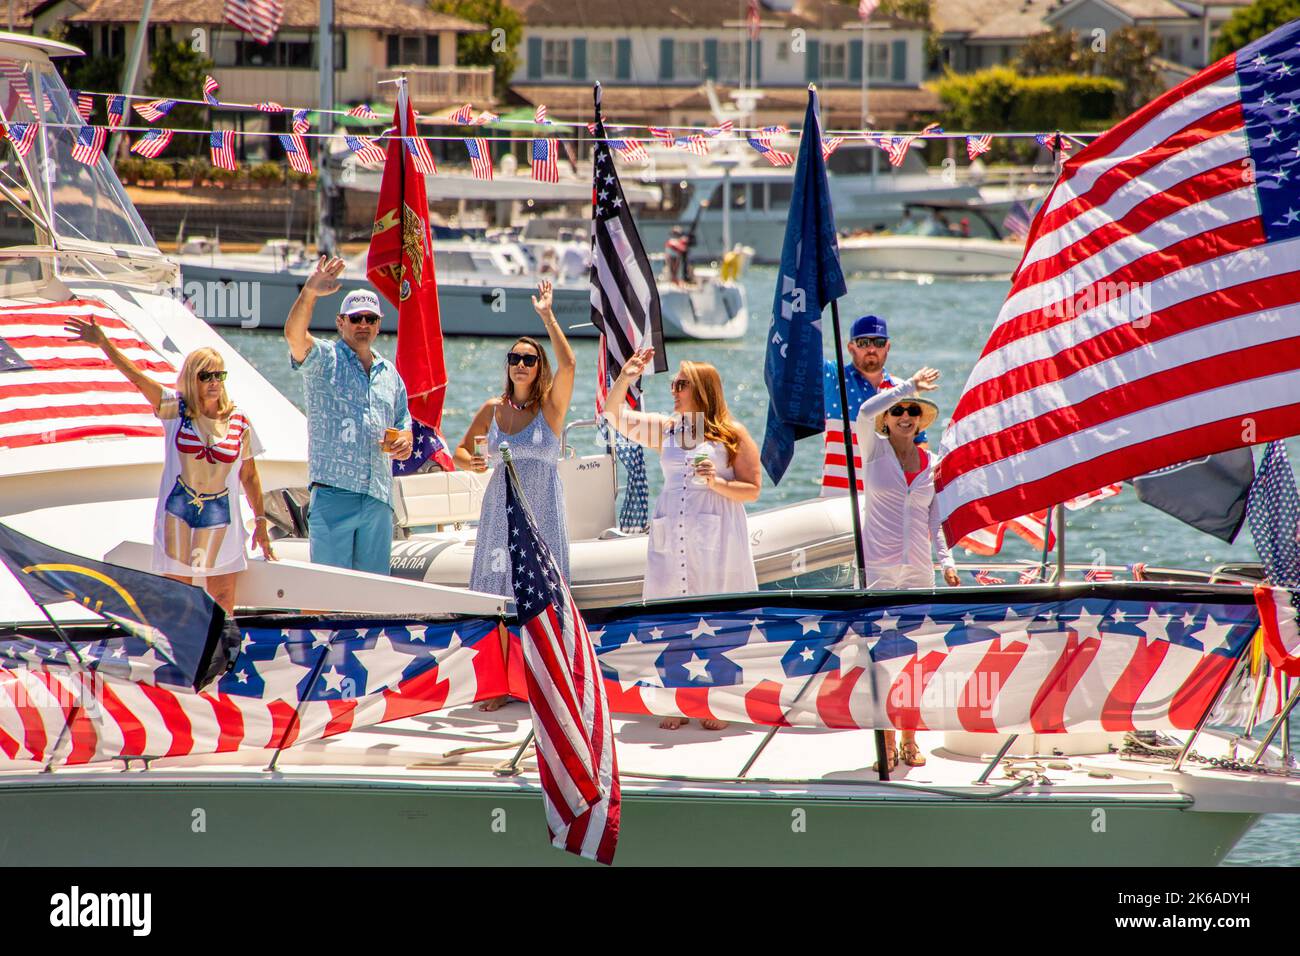 Boat crew and passengers are surrounded by US flags and bunting at a